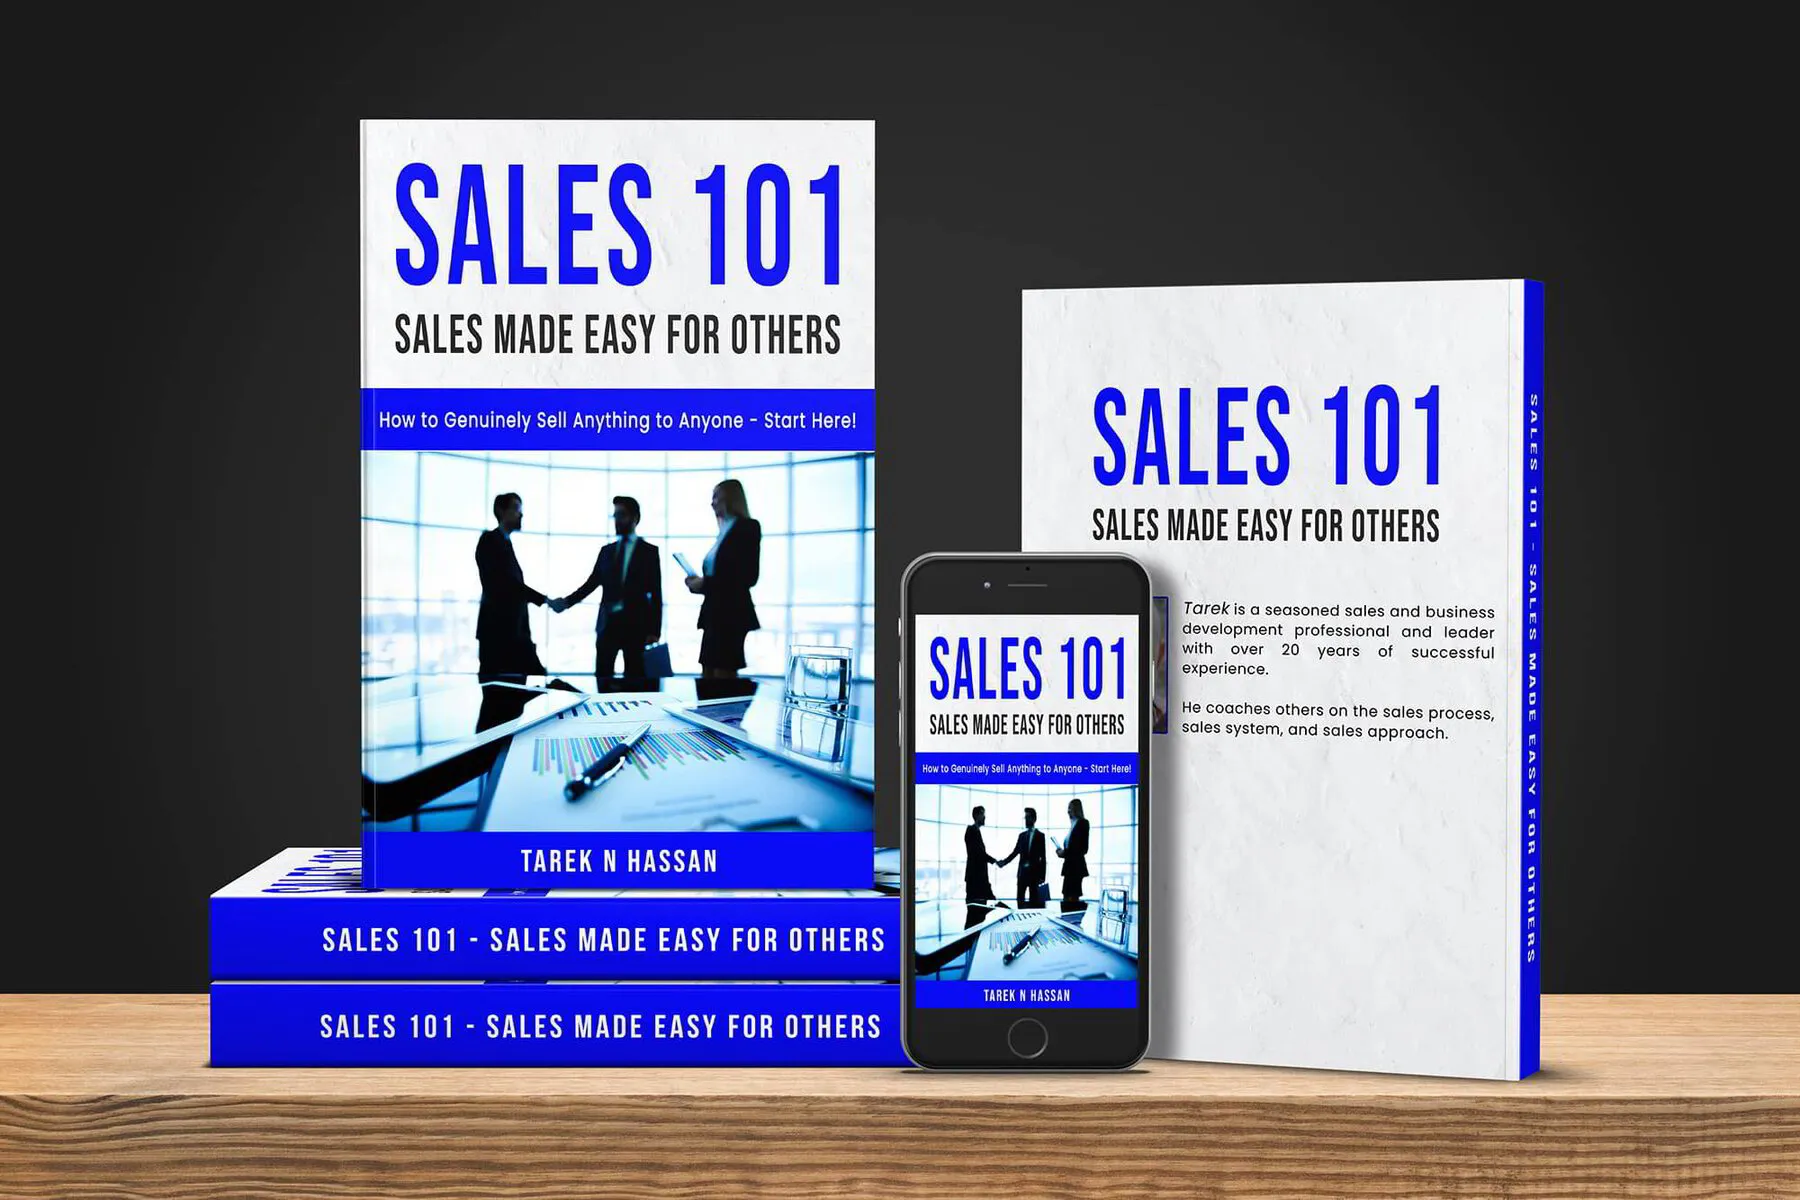 Sales 101 - Sales Made Easy For Others